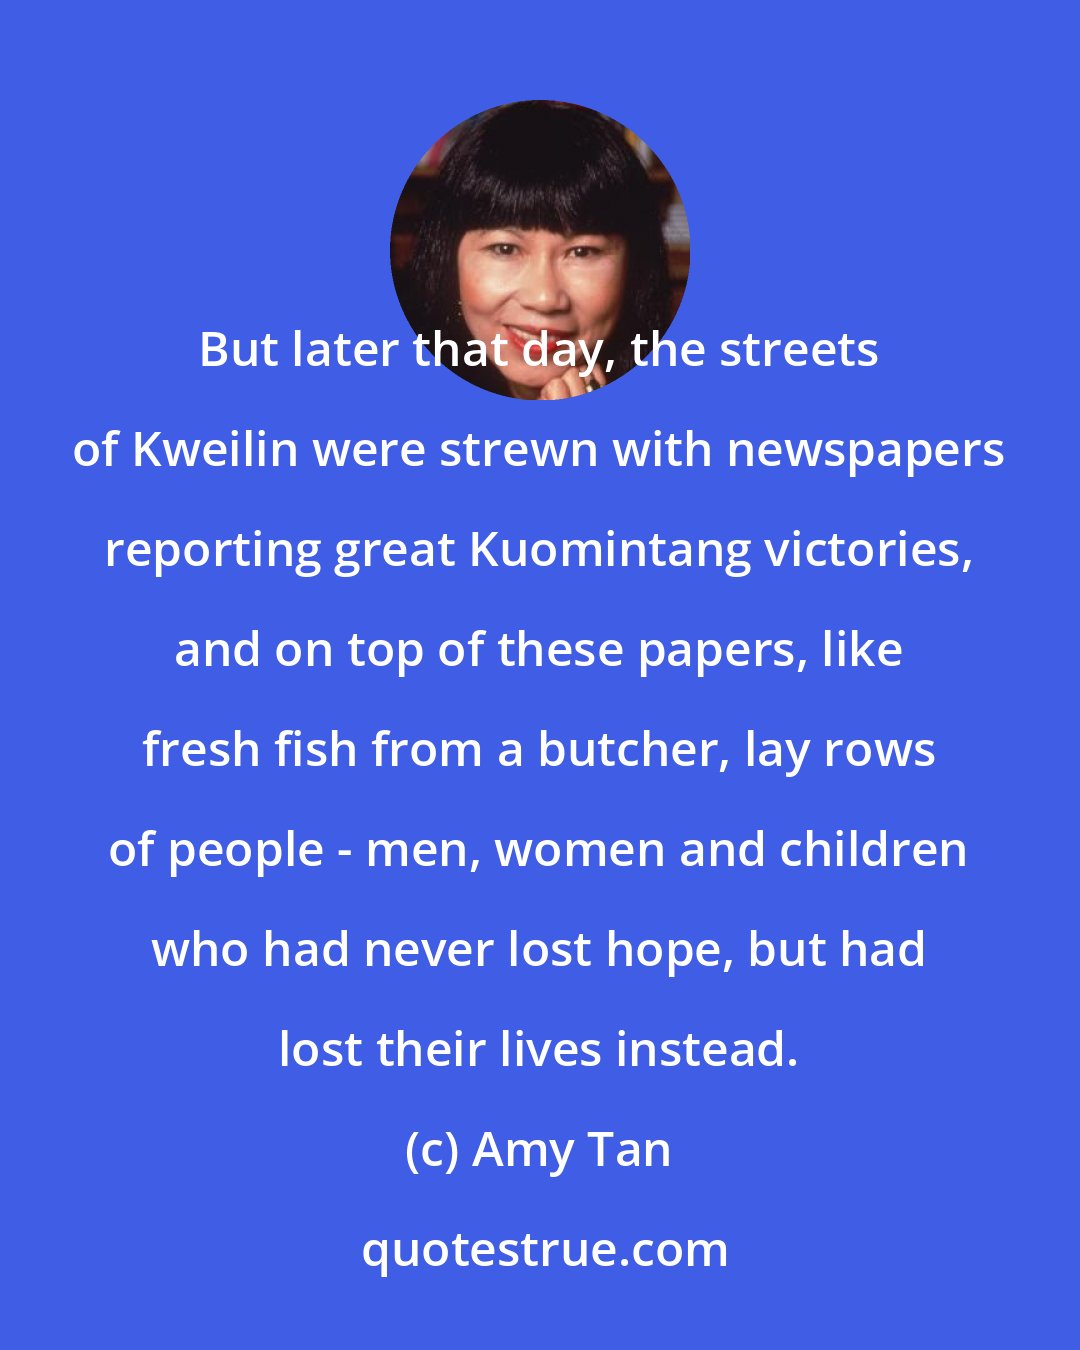 Amy Tan: But later that day, the streets of Kweilin were strewn with newspapers reporting great Kuomintang victories, and on top of these papers, like fresh fish from a butcher, lay rows of people - men, women and children who had never lost hope, but had lost their lives instead.